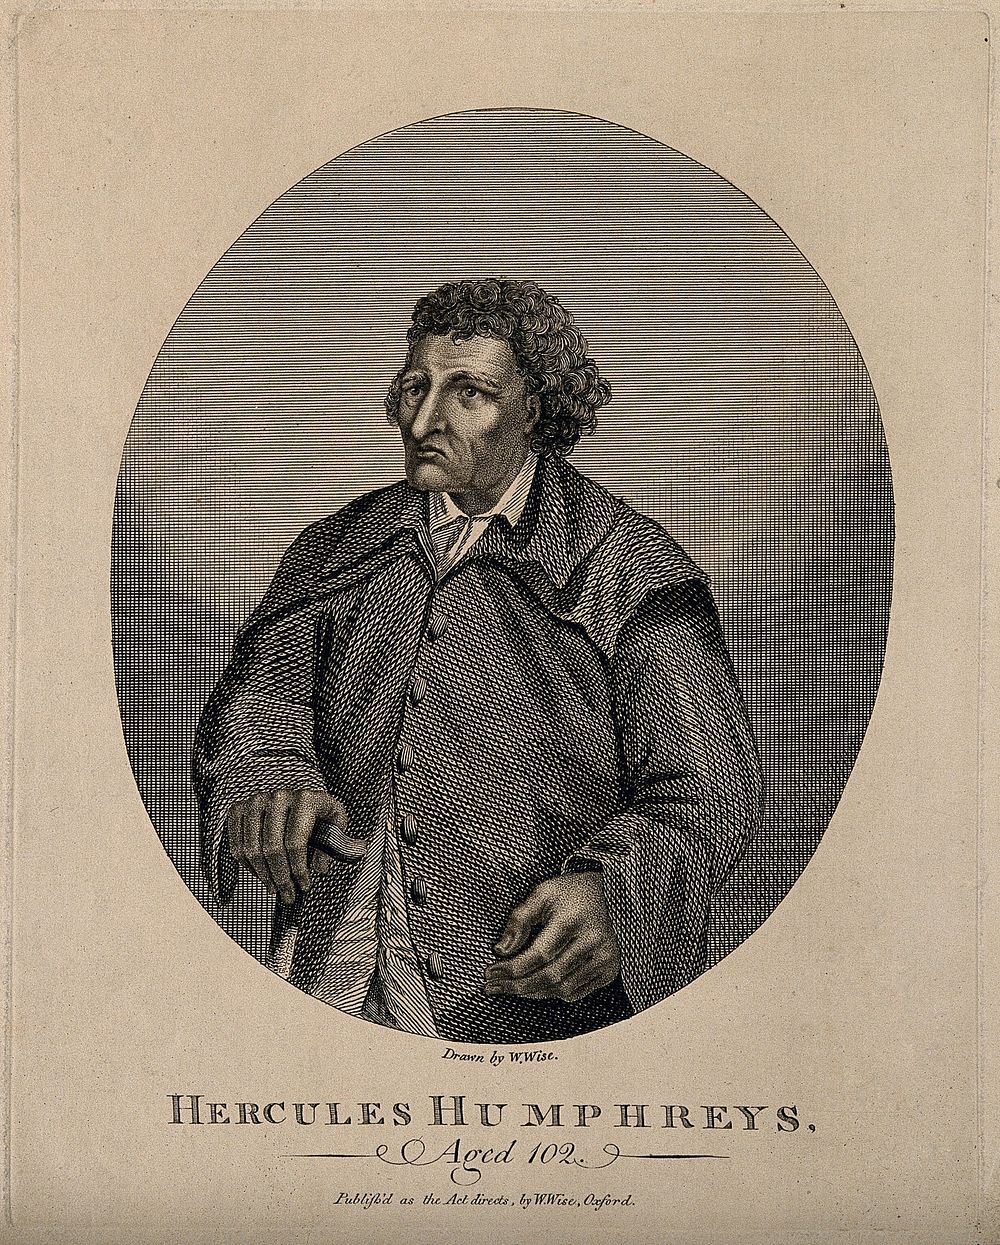 Hercules Humphreys, aged 102. Engraving by W. Wise after himself.